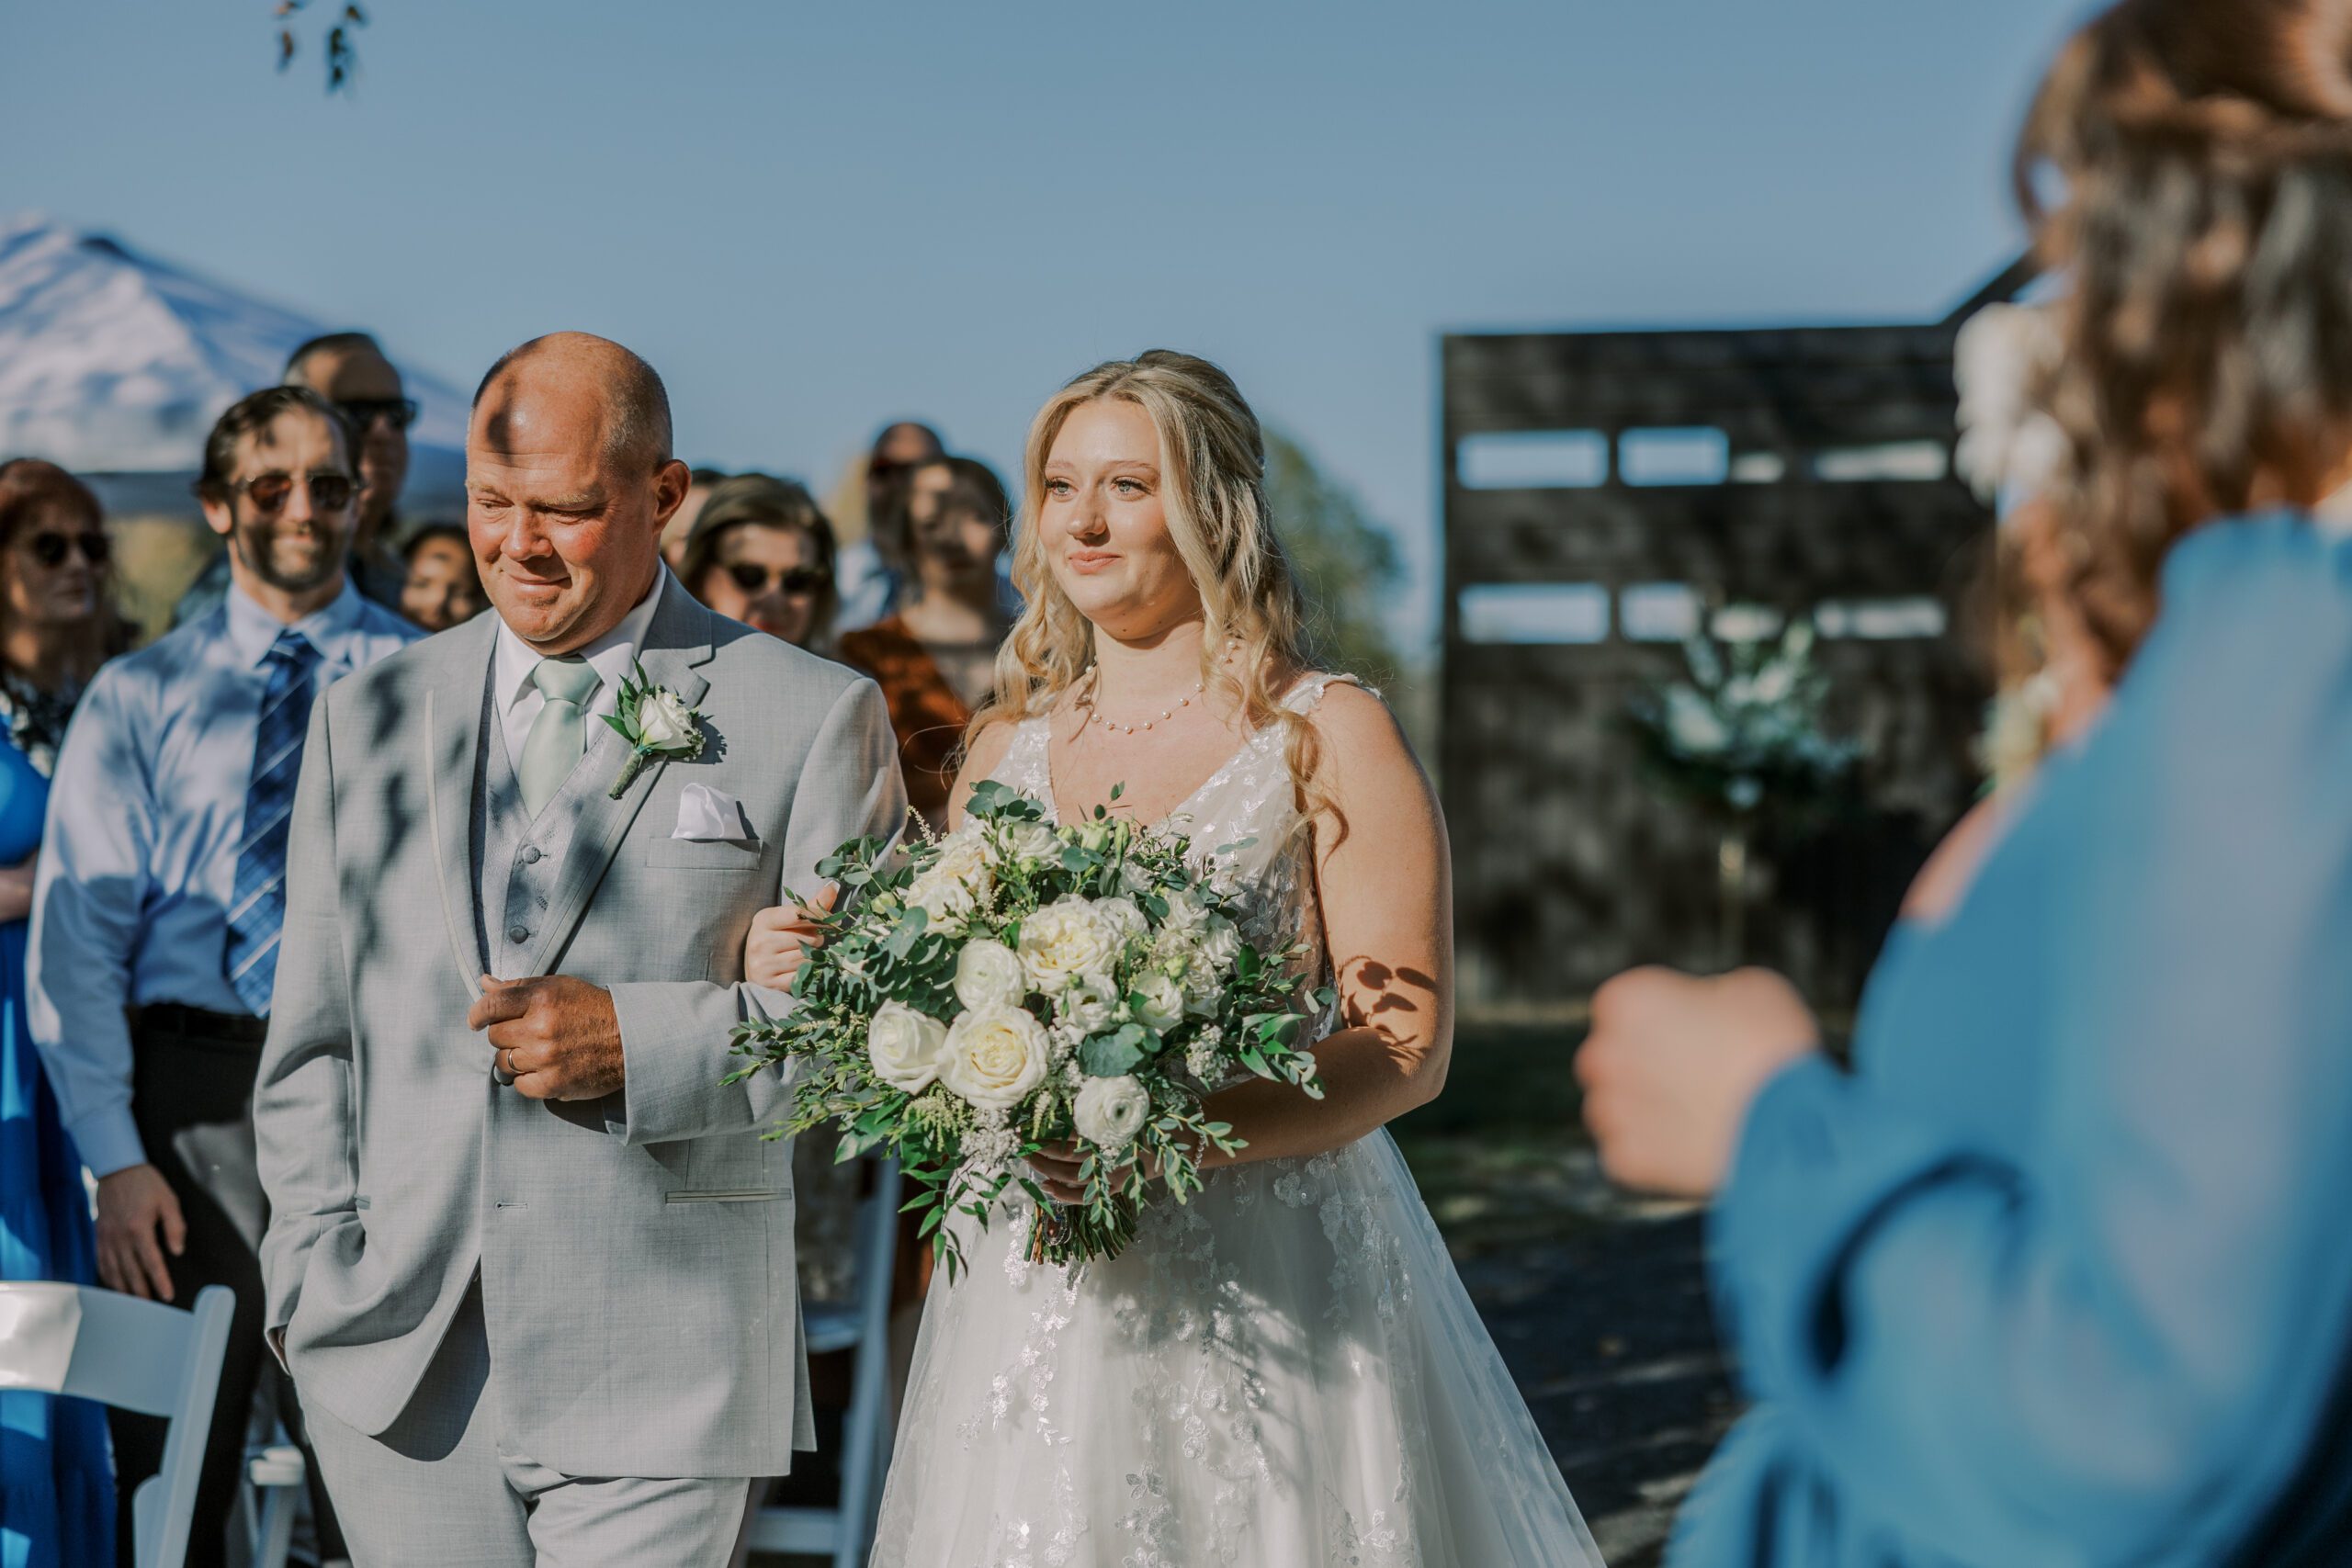 Bride and her father walking down aisle, bride is holding a large bouquet of white flowers and greenery